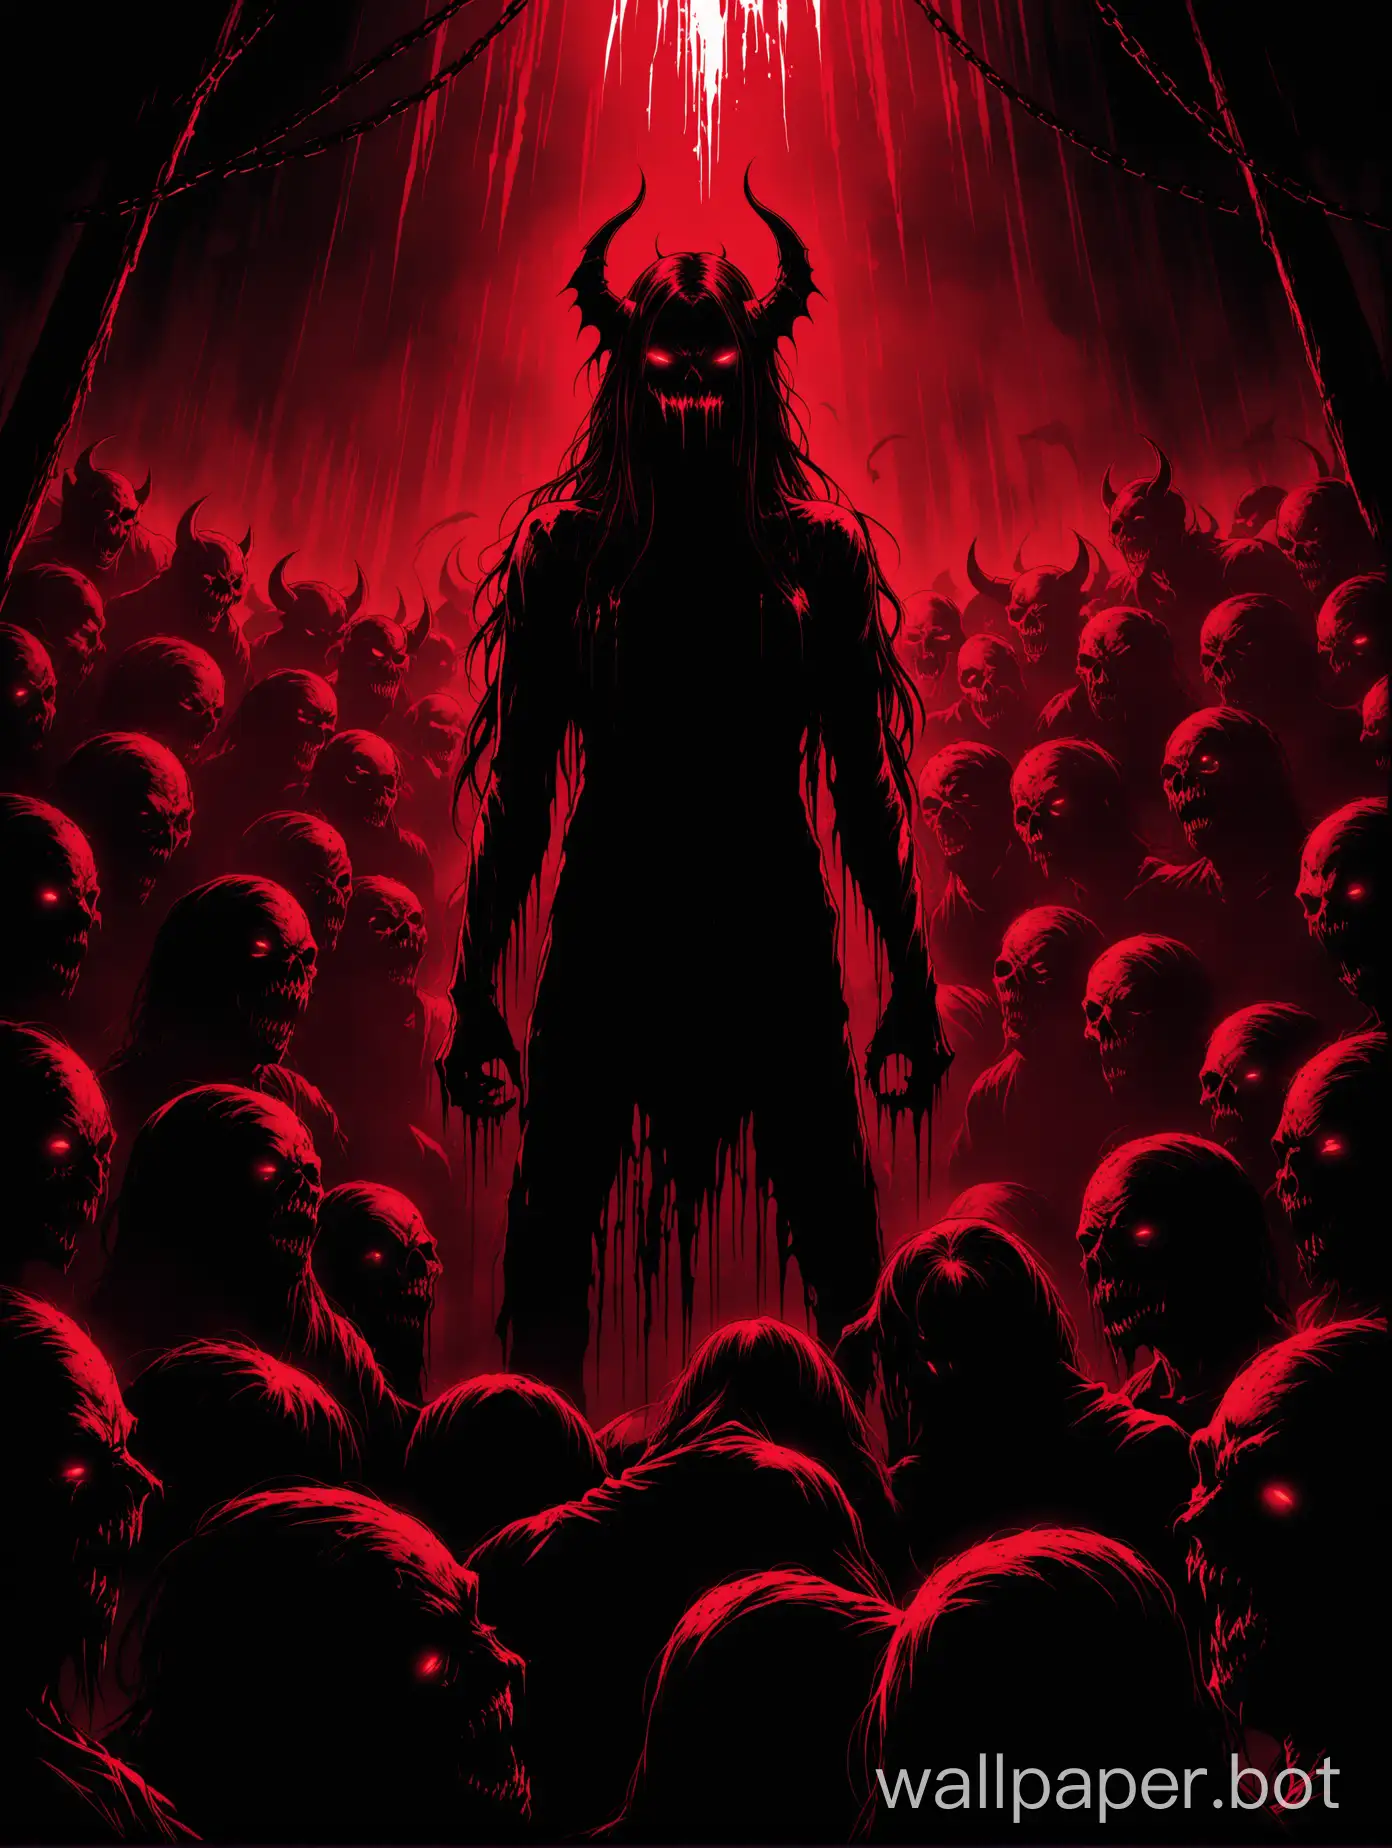 vector art , make a death metal cover with demon , blood  , painful people , dark ambient , dramatic light